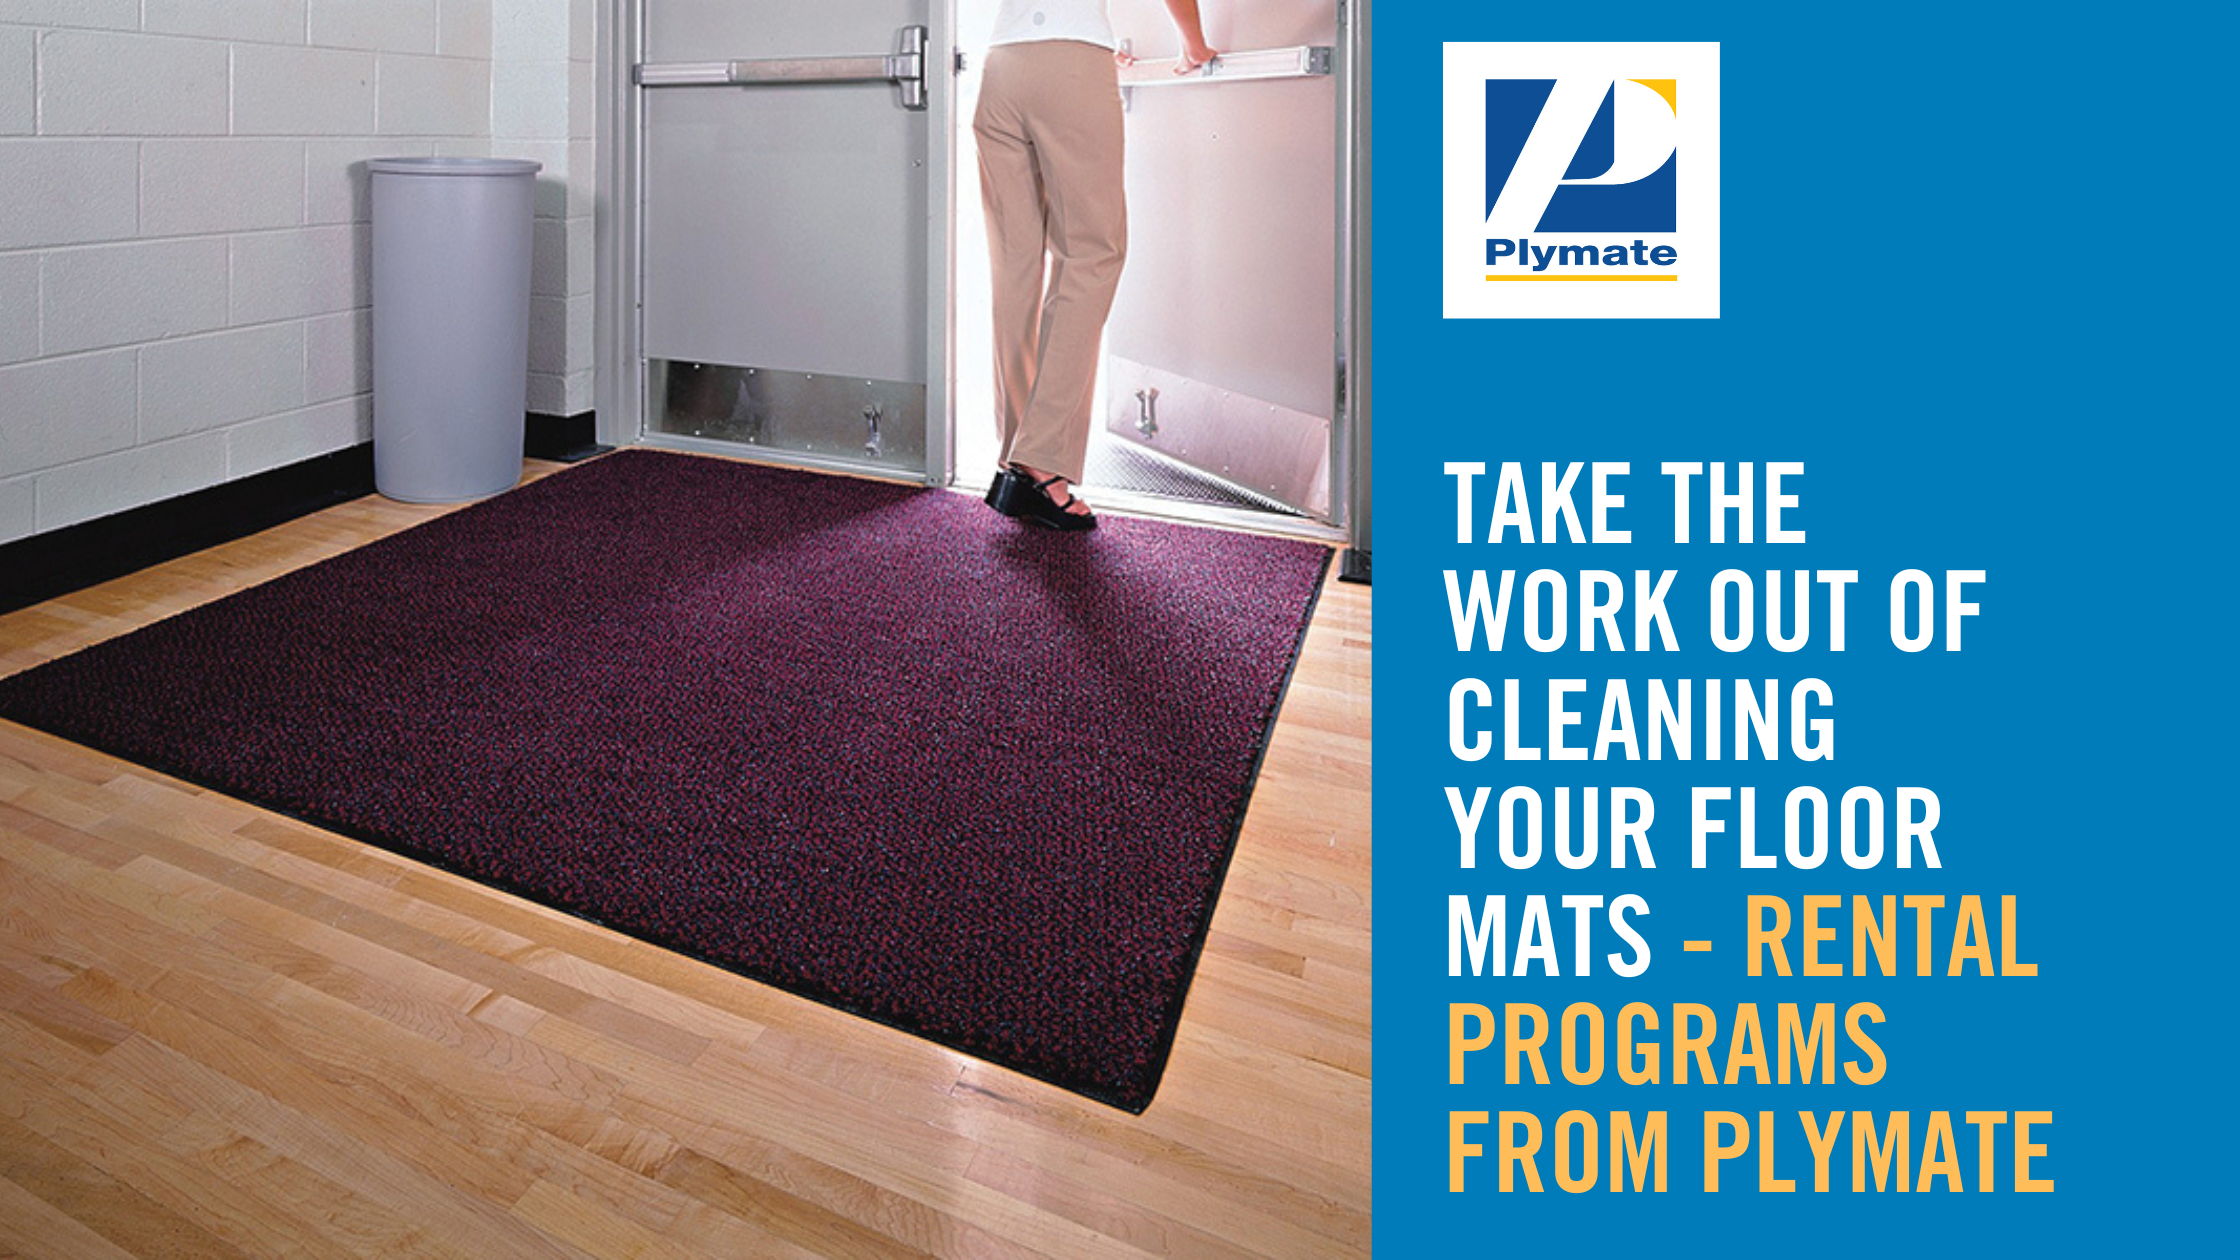 Take the Work out of Cleaning Your Floor Mats - Rental Programs From Plymate